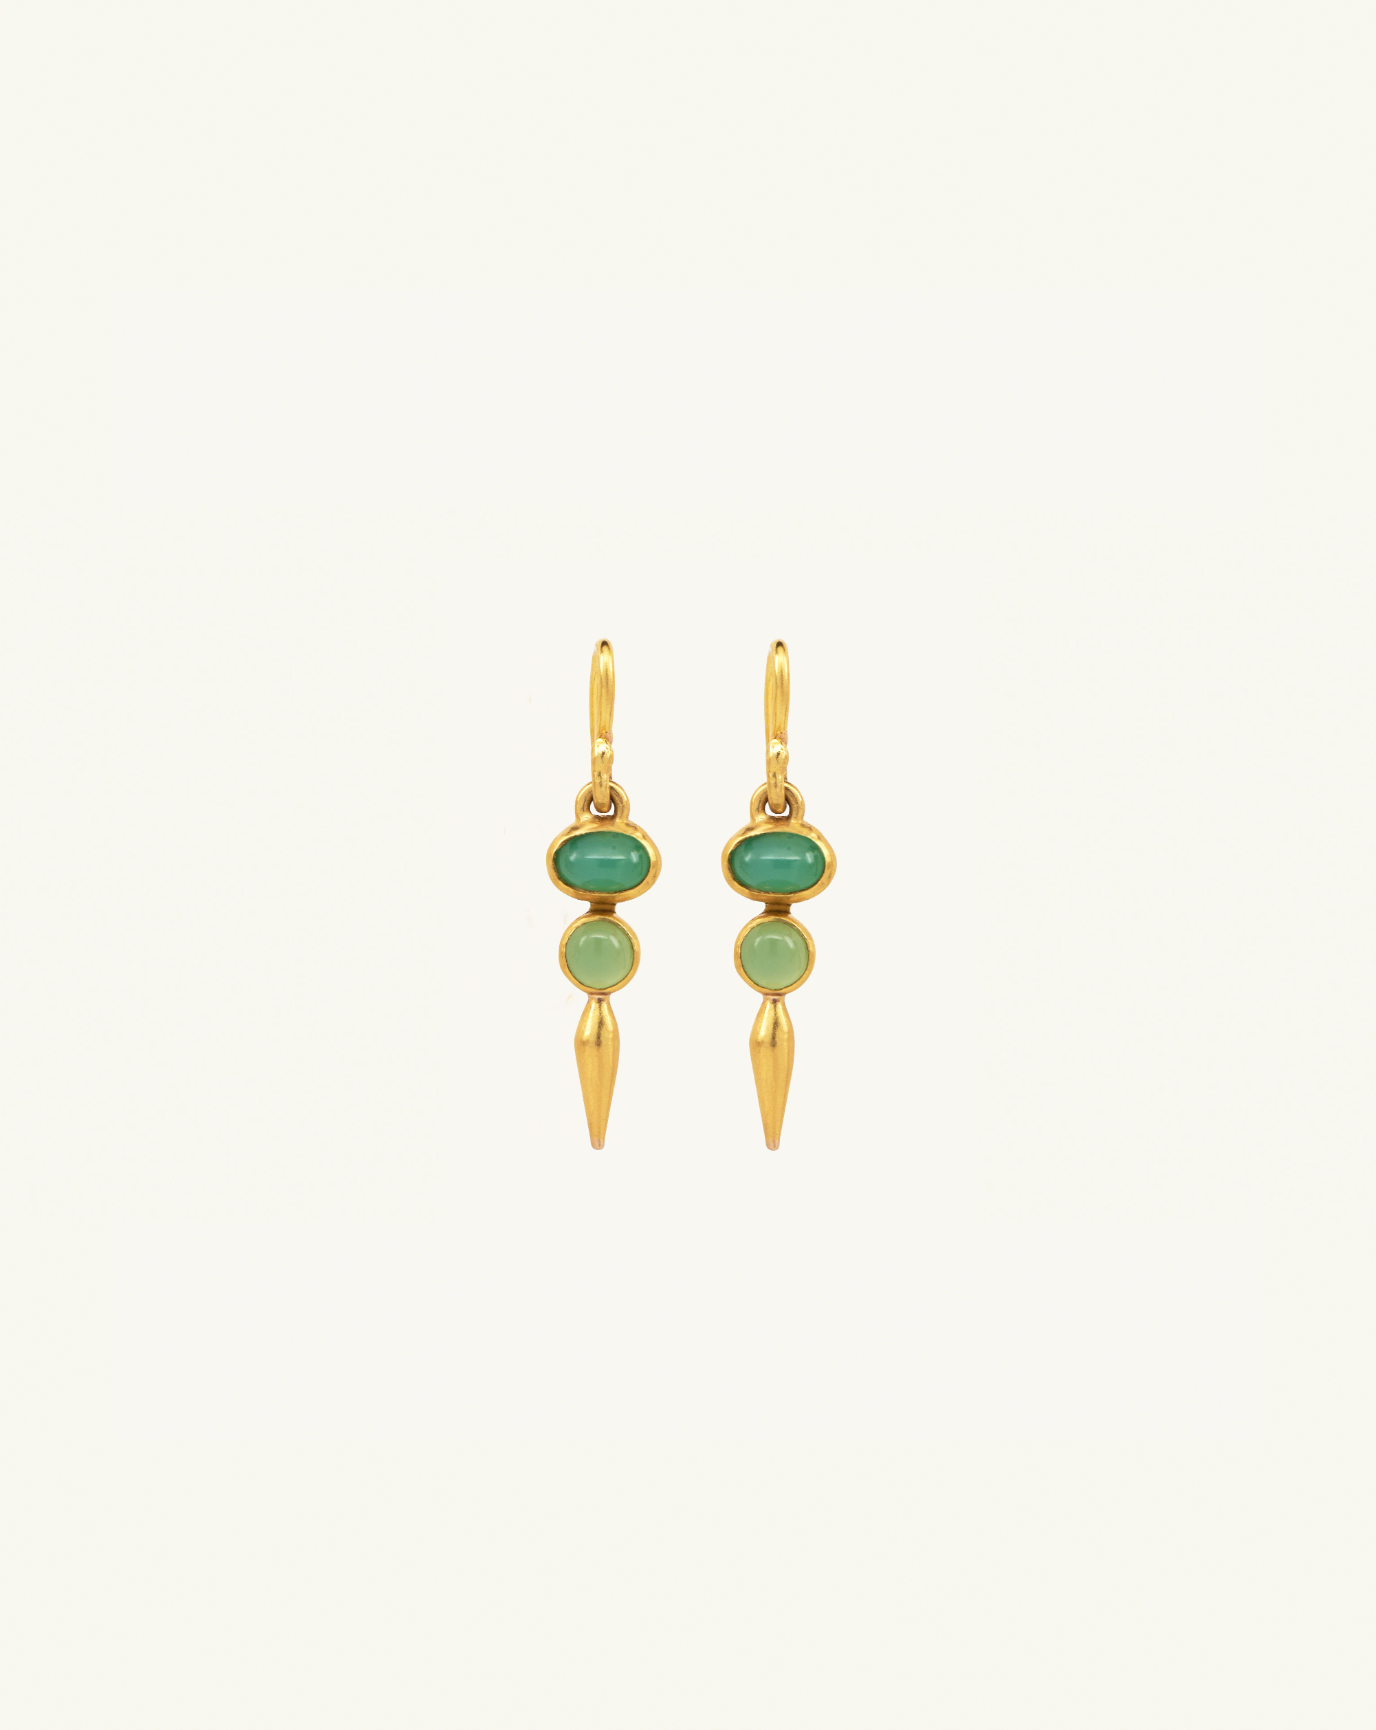 Product image of the gemstone drop earrings with two small oval emerald gemstones